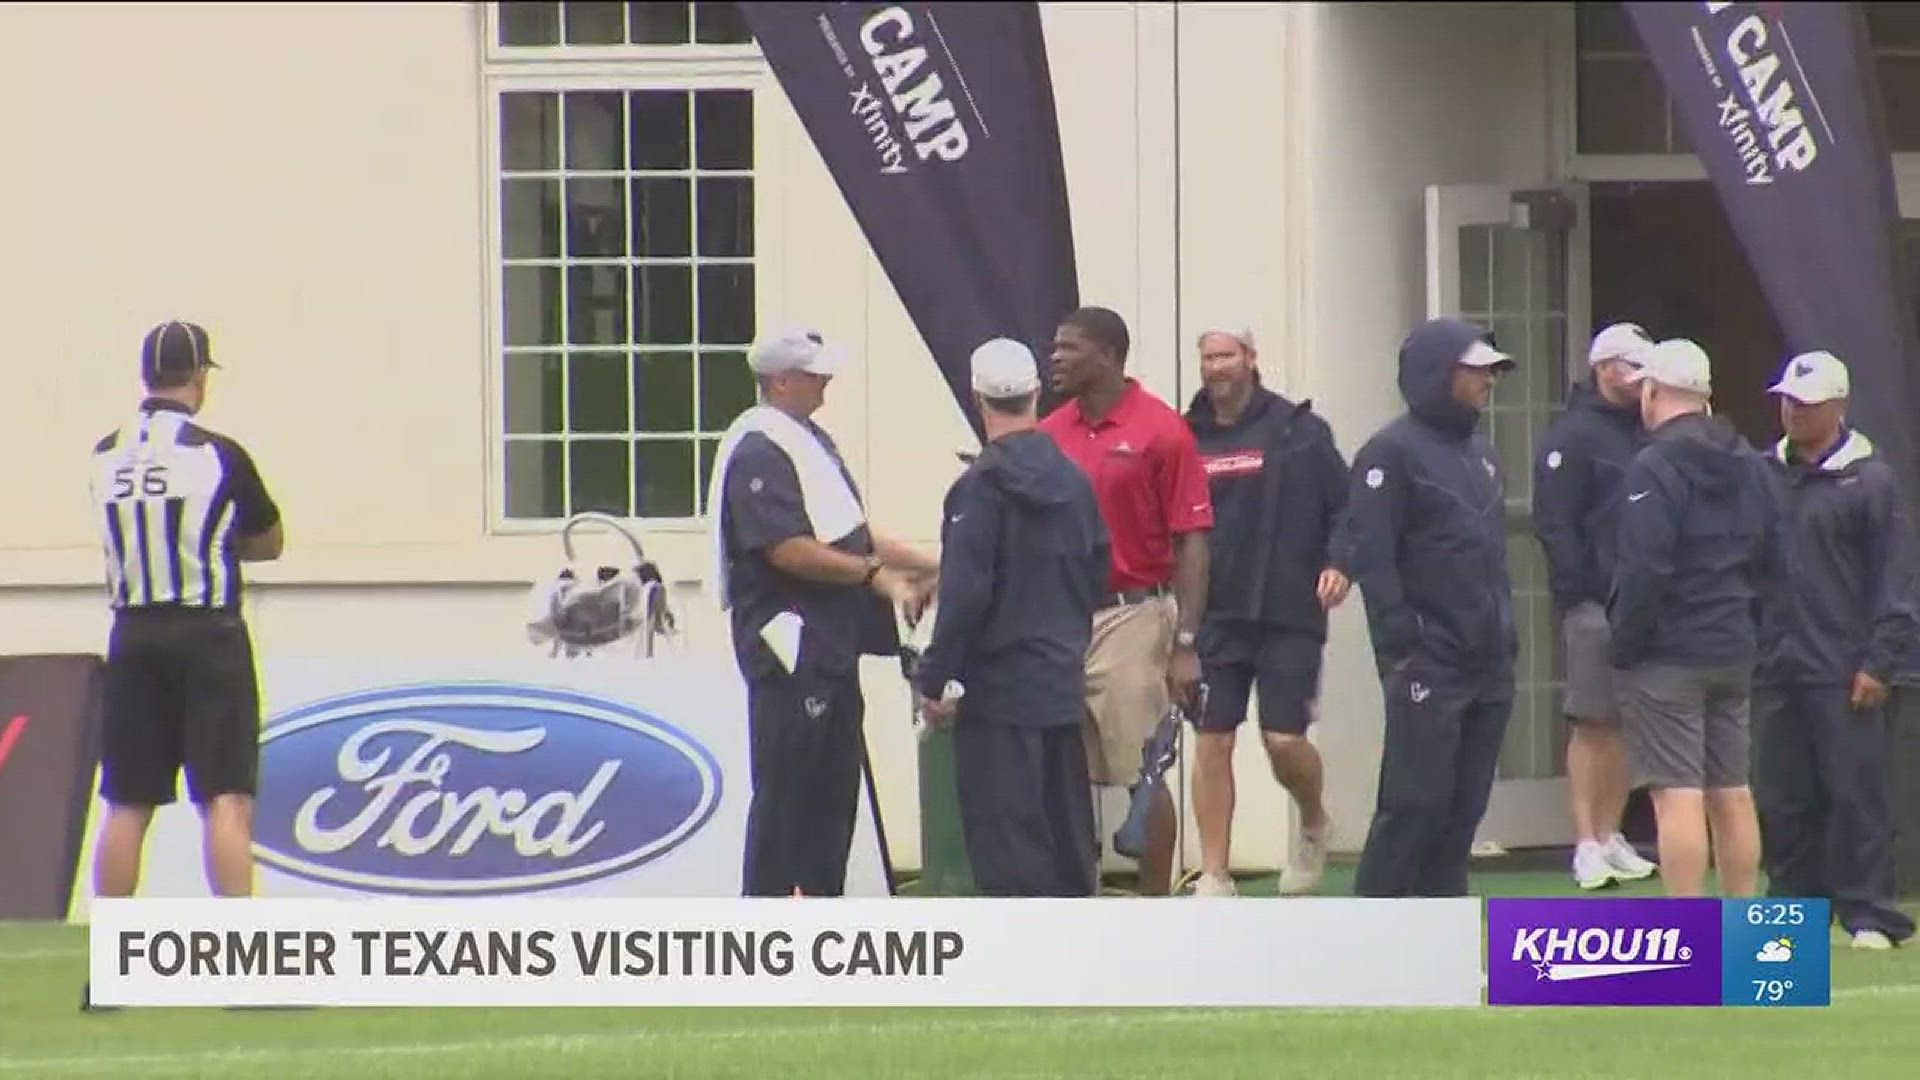 The Houston Texans got a visit from former Texans players during training camp on Saturday. The team is five days away from their first preseason game.